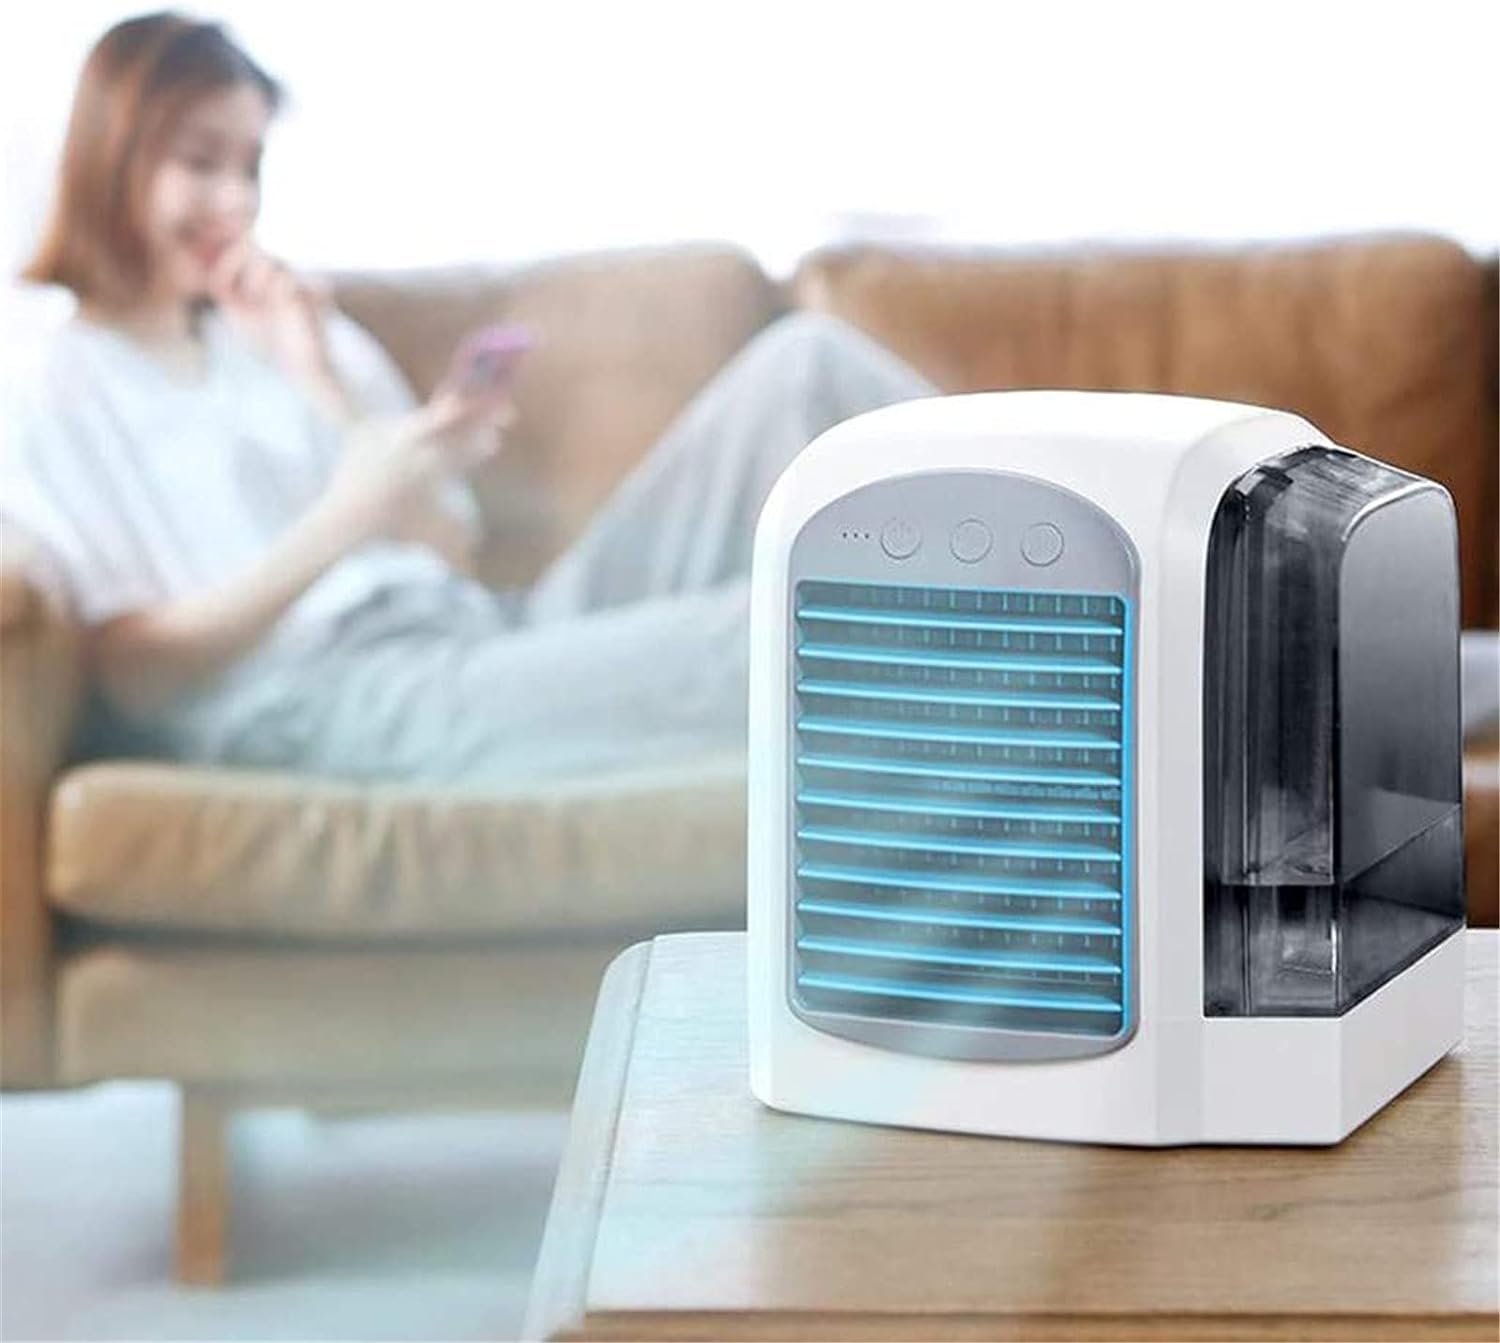 XXY216 Breeze Maxx Air Cooler,Personal Space Mini Evaporative Air Cooler,Portable 3-in-1 Air Cooling Purification Humidifier-for Campi